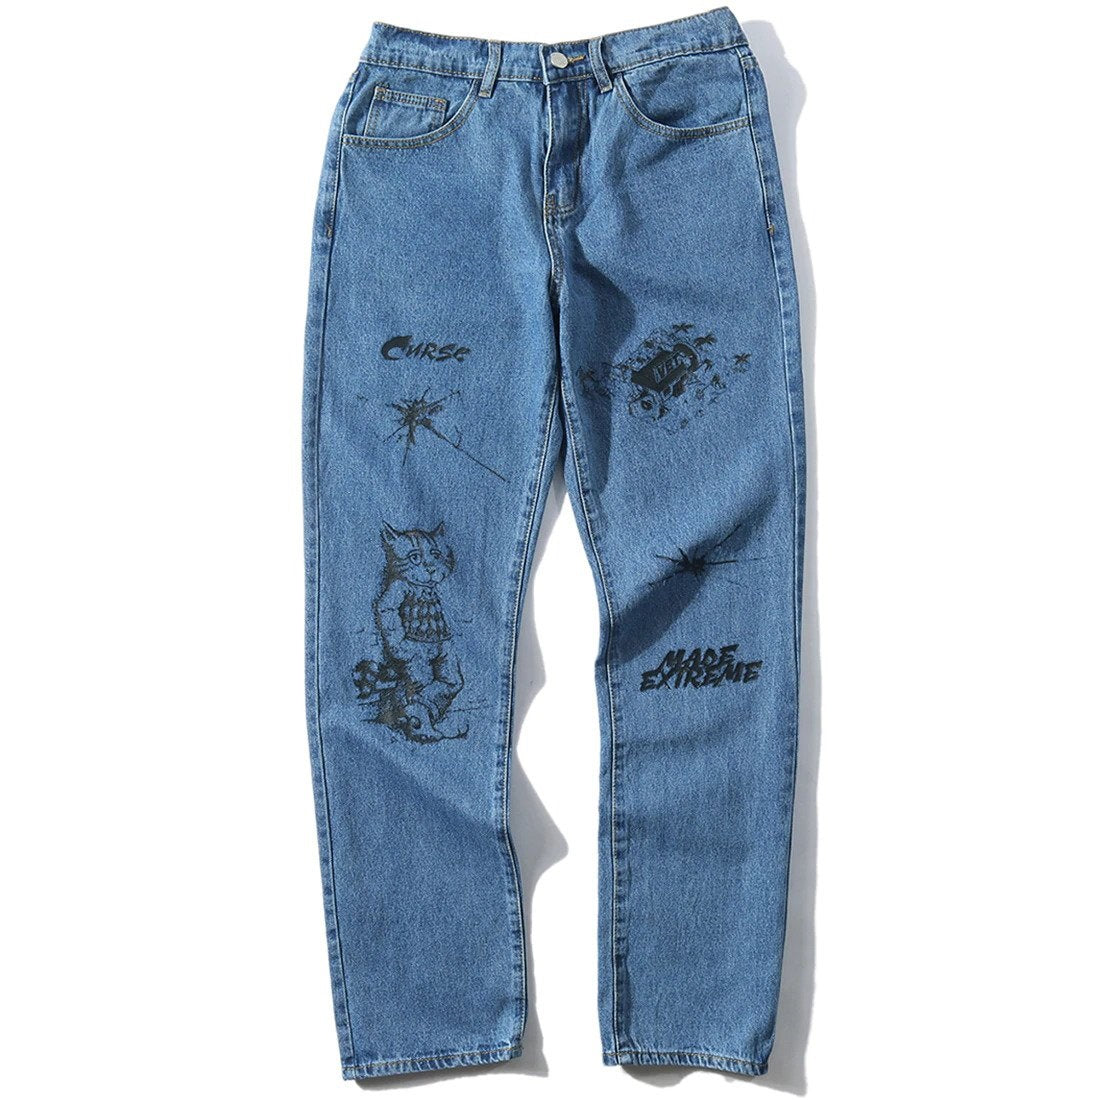 Extreme Aesthetic Customized Jeans 